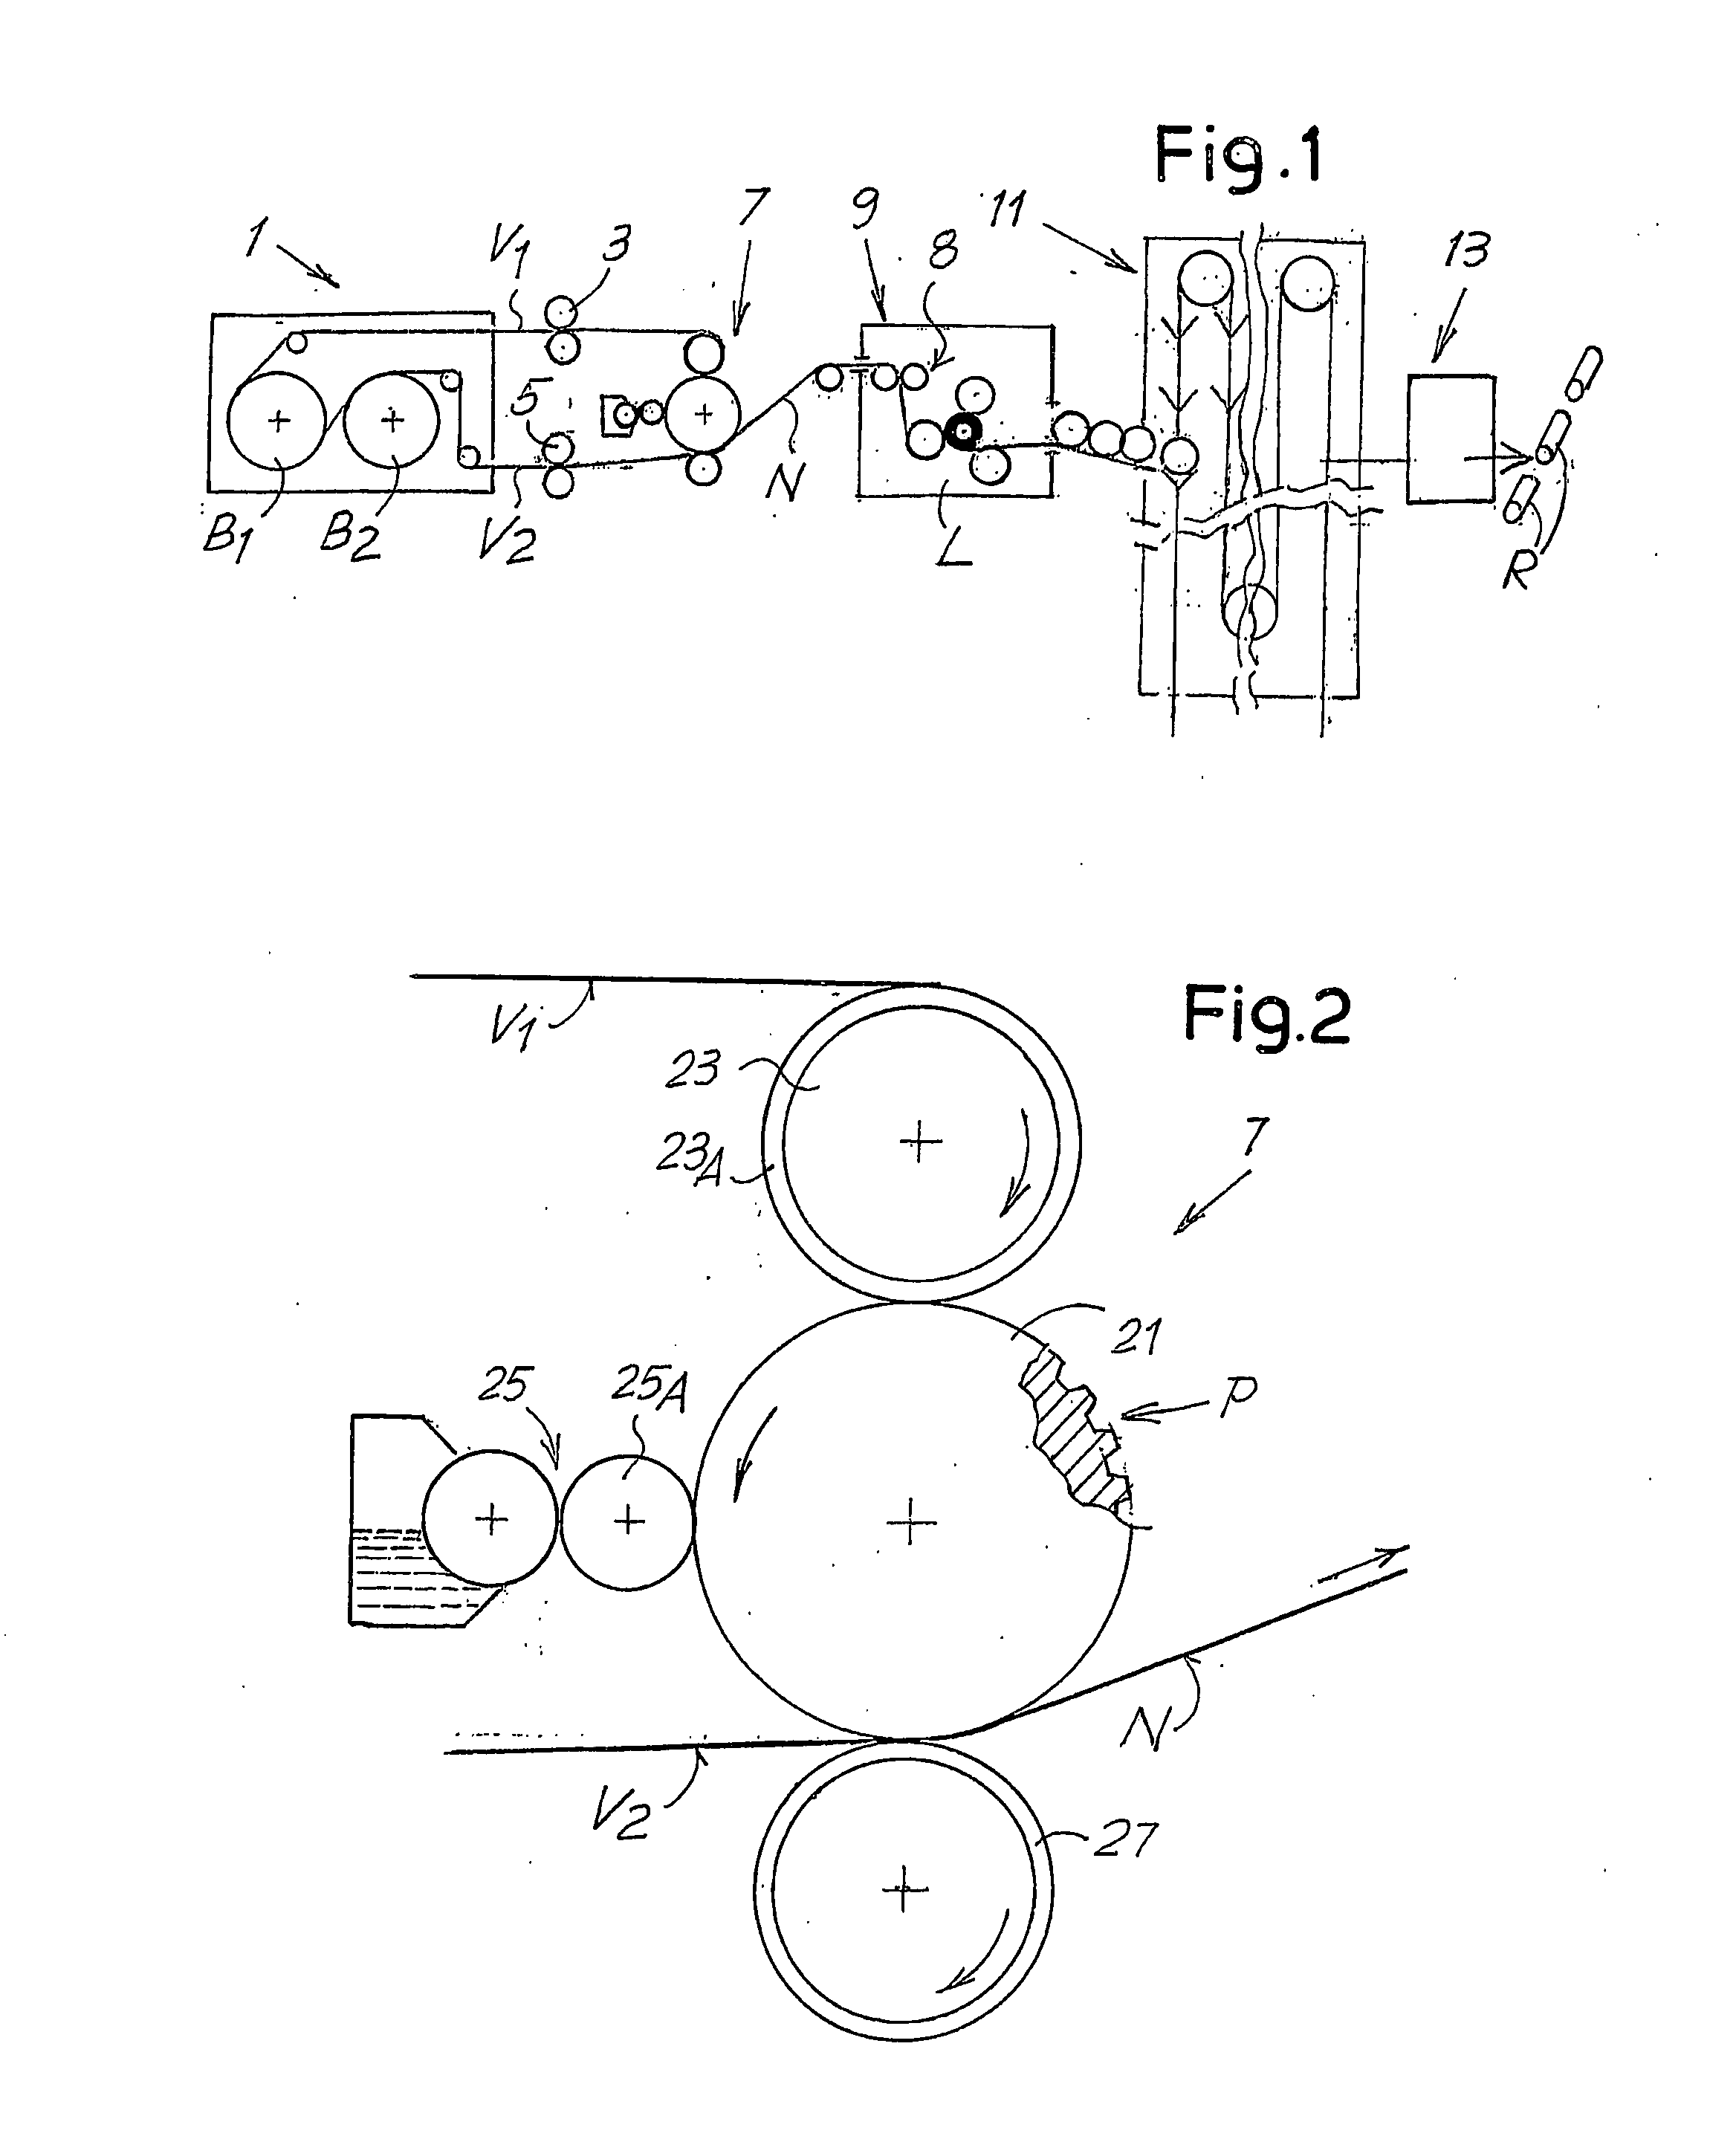 Embossing Roller, Embossing Device Including Said Roller and Paper Article Produced With Said Embossing Device